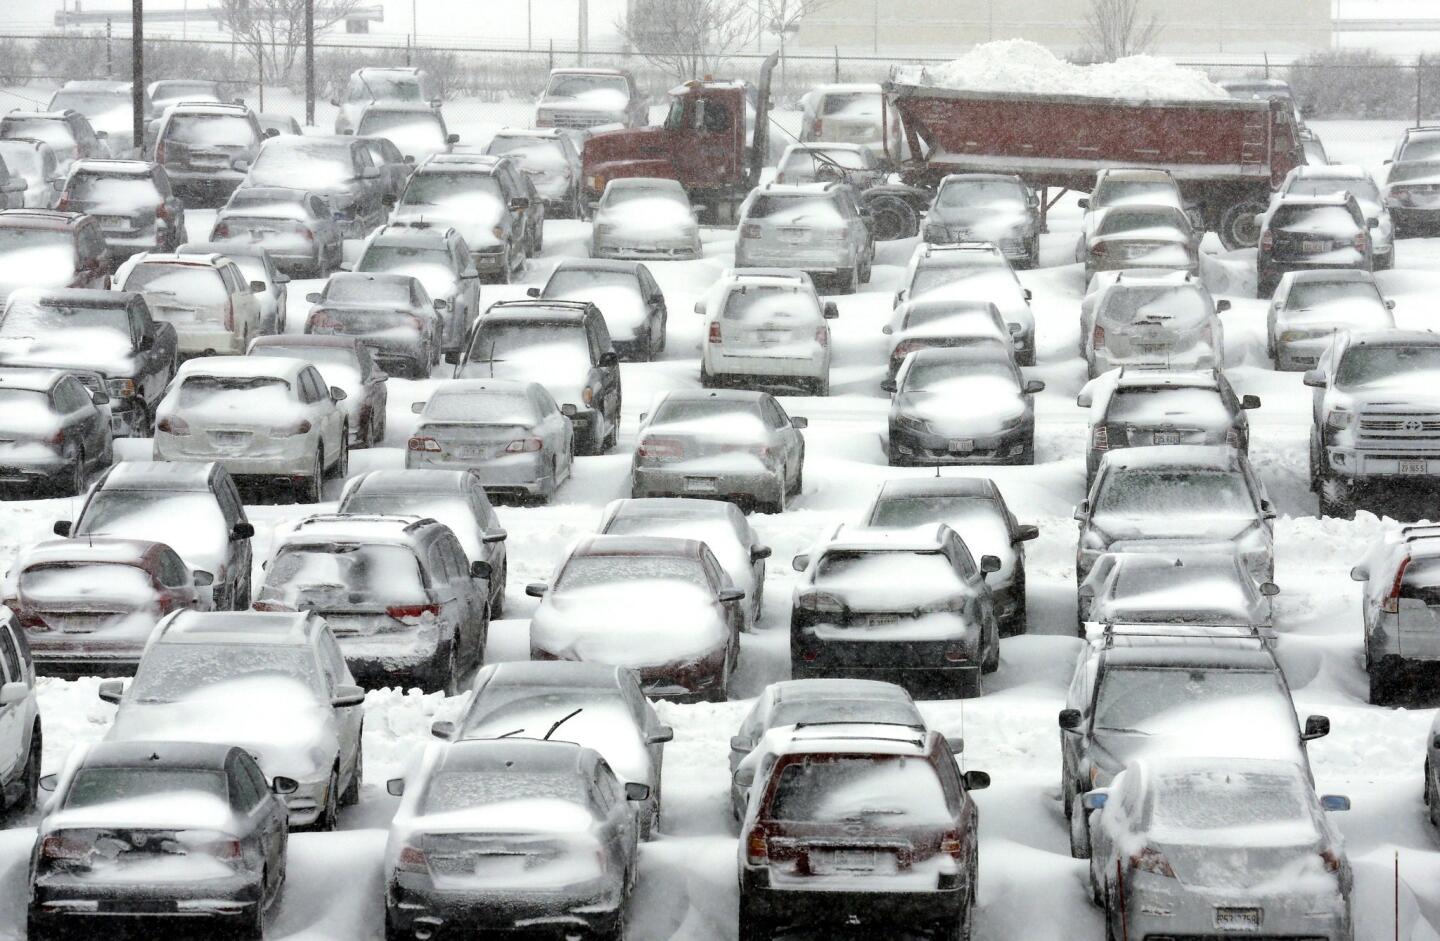 A parking lot at O'Hare International Airport.